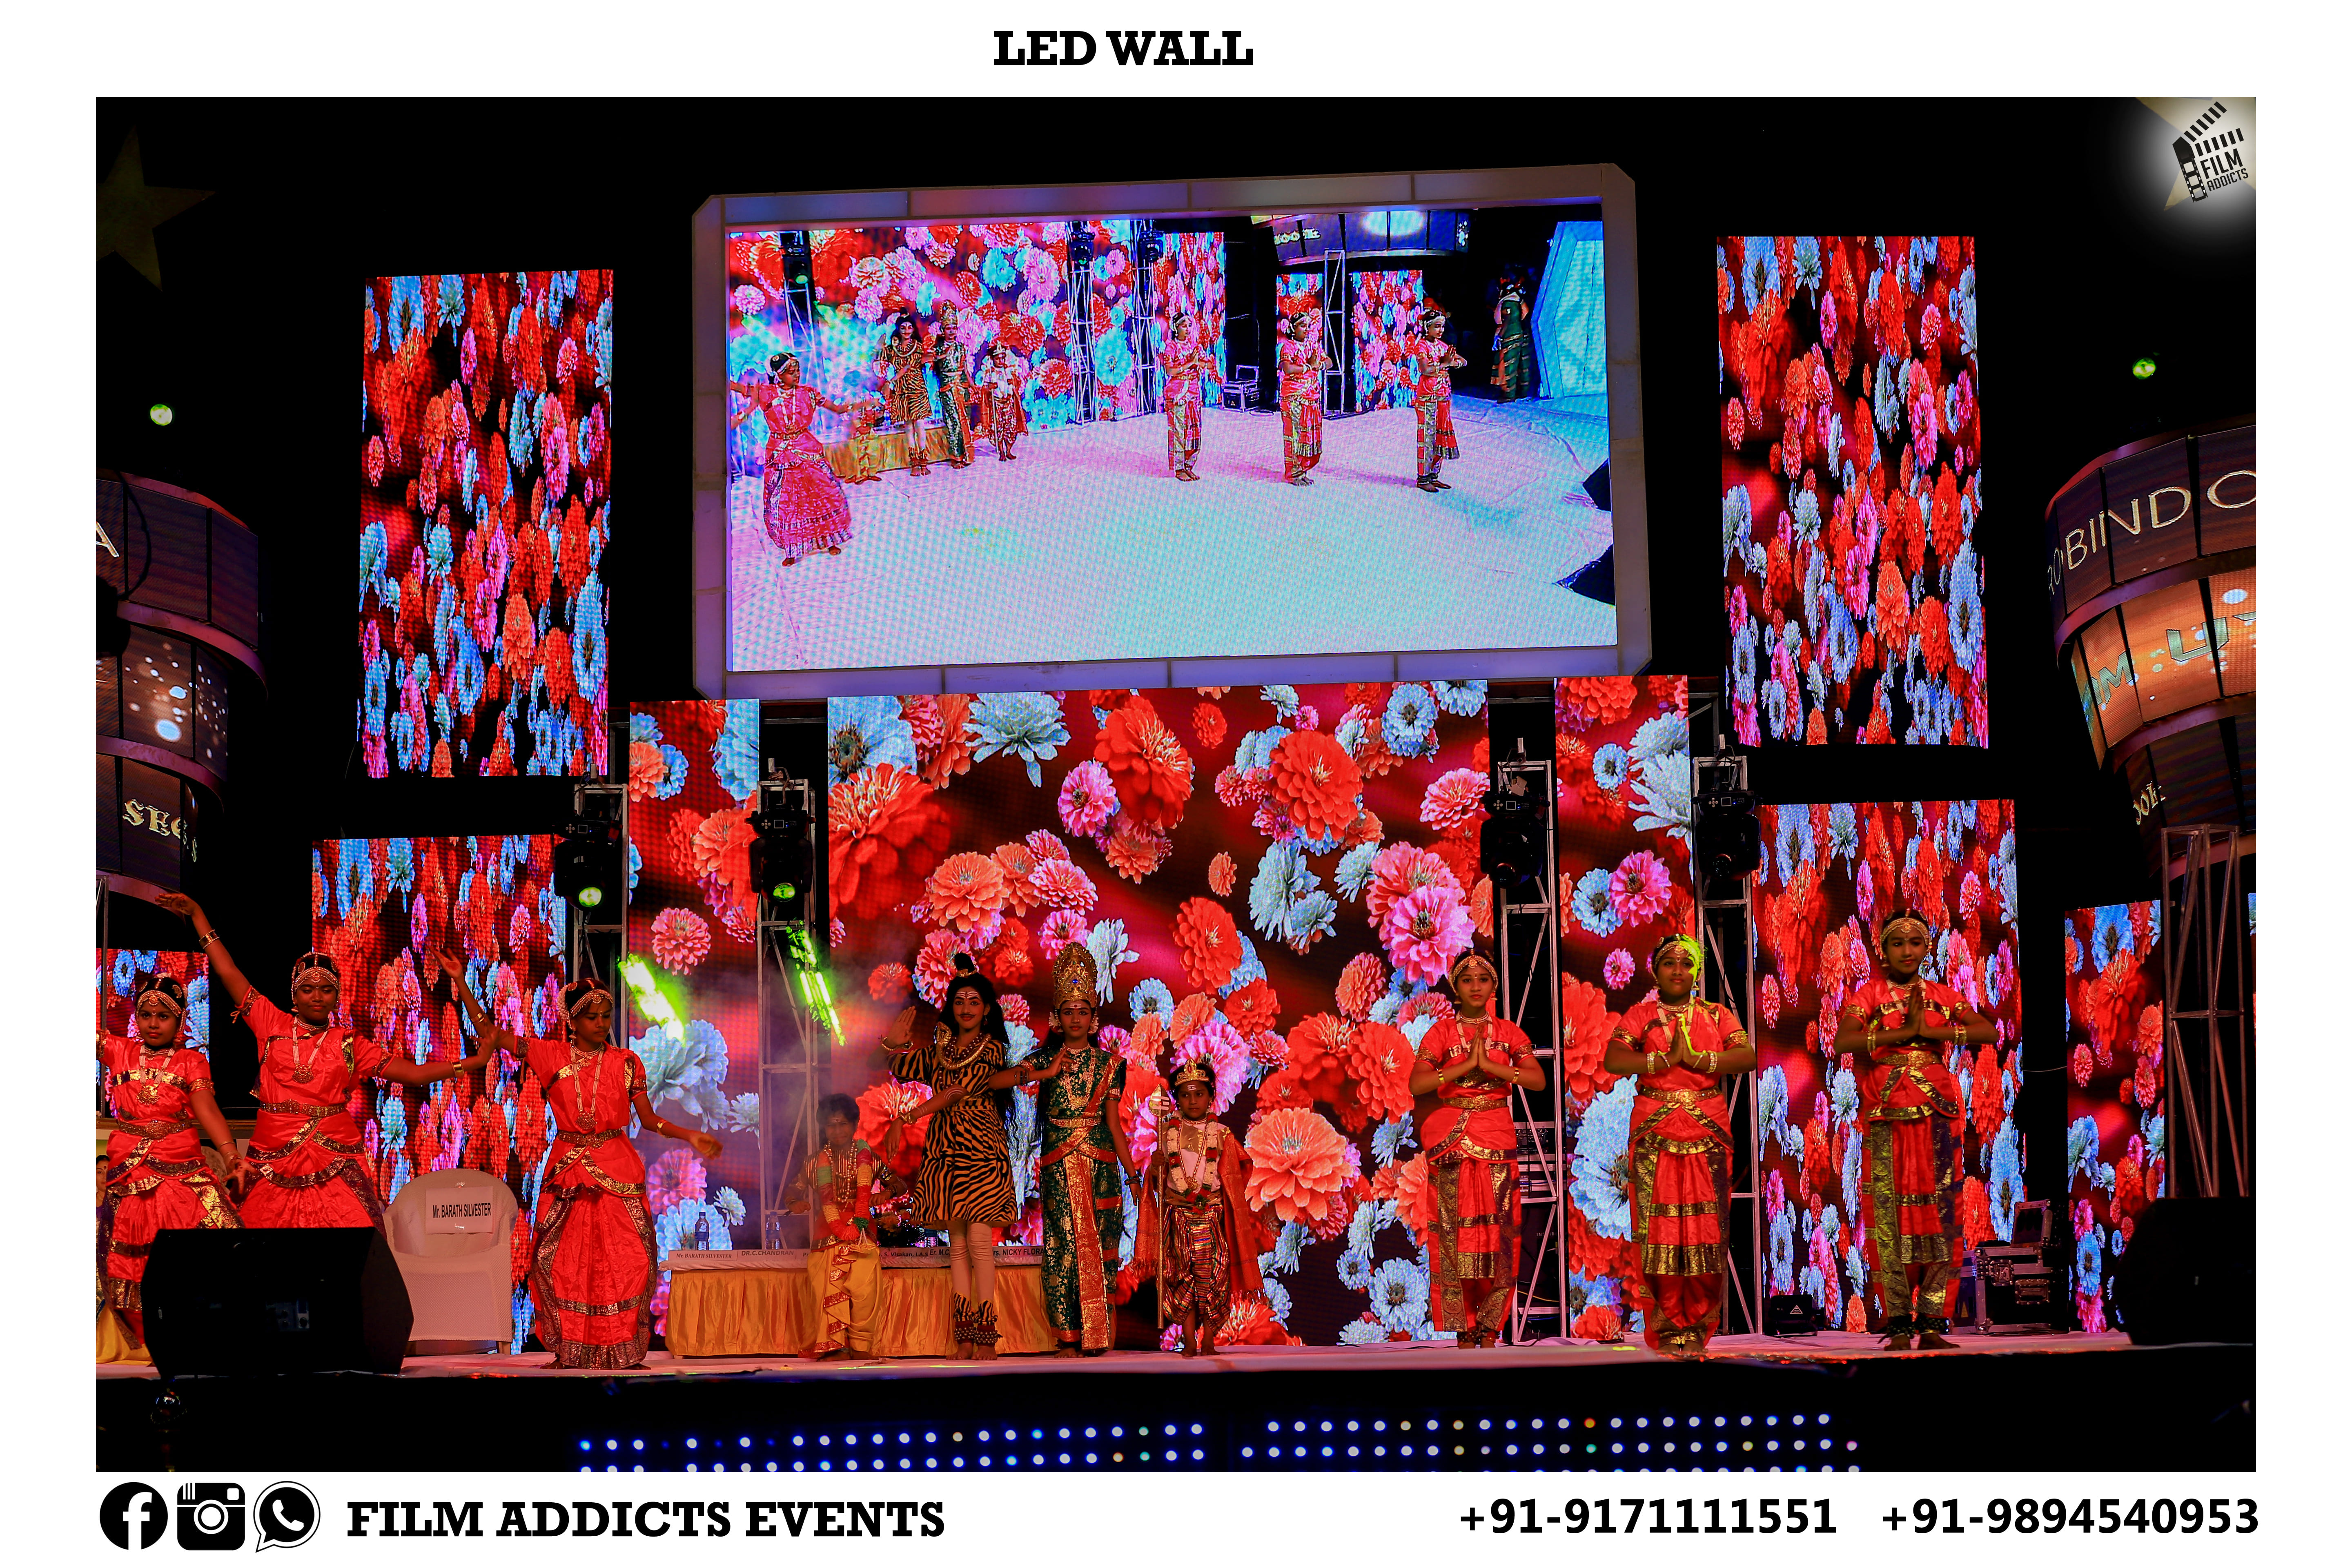 Best LED Video Wall Services in Theni, Best LED Wall Services In Theni ,Best LED Wall Rental Services In Theni, Best Budget LED Wall Rental  Services in Theni, Best Wedding LED Wall Rentals In Theni, Best clarity in led wall rentals in Theni, Best cost-effective display rentals in Theni, Best crisp, bright, high resolution led video services in Theni, Best led wall rental services in Theni, Best tailored lighting, vision and sound solutions led rentals in Theni, Best outstanding new LED panels rental Service in Theni, Best Indoor and Outdoor LED panels rental Service in Theni, Best high resolution LED display rental Service in Theni, Best Wedding LED wall rentals in Theni, Best Grand wedding LED wall rentals in Theni, Best LED wall rental Service in Theni, Best LED Video Services in Theni, Best Grand Wedding LED wall Renatls in Theni, Best LED wall Rentals for Grand Occasions in Theni, Best Wedding LED Video Services in Theni, Best Wedding LED video wall Rental Services in Theni, Best LED Video Wall Rentals for Grand Occassions in Theni, Best LED Video Wall Rentals for events in Theni, Best LED video Services for live events in Theni, Best video wall rentals for Live events in Theni, Best LED Video Wall Rentals for Live events in Theni, Best LED Video Wall On Hire in Theni, Best LED Video Wall Services in Theni, Best LED Video Wall Service Systems in Theni, Best LED Wall Washer Light Services in Theni, Best LED Wall Light Services in Theni, Best LED Wall Mount Bracket Services in Theni.